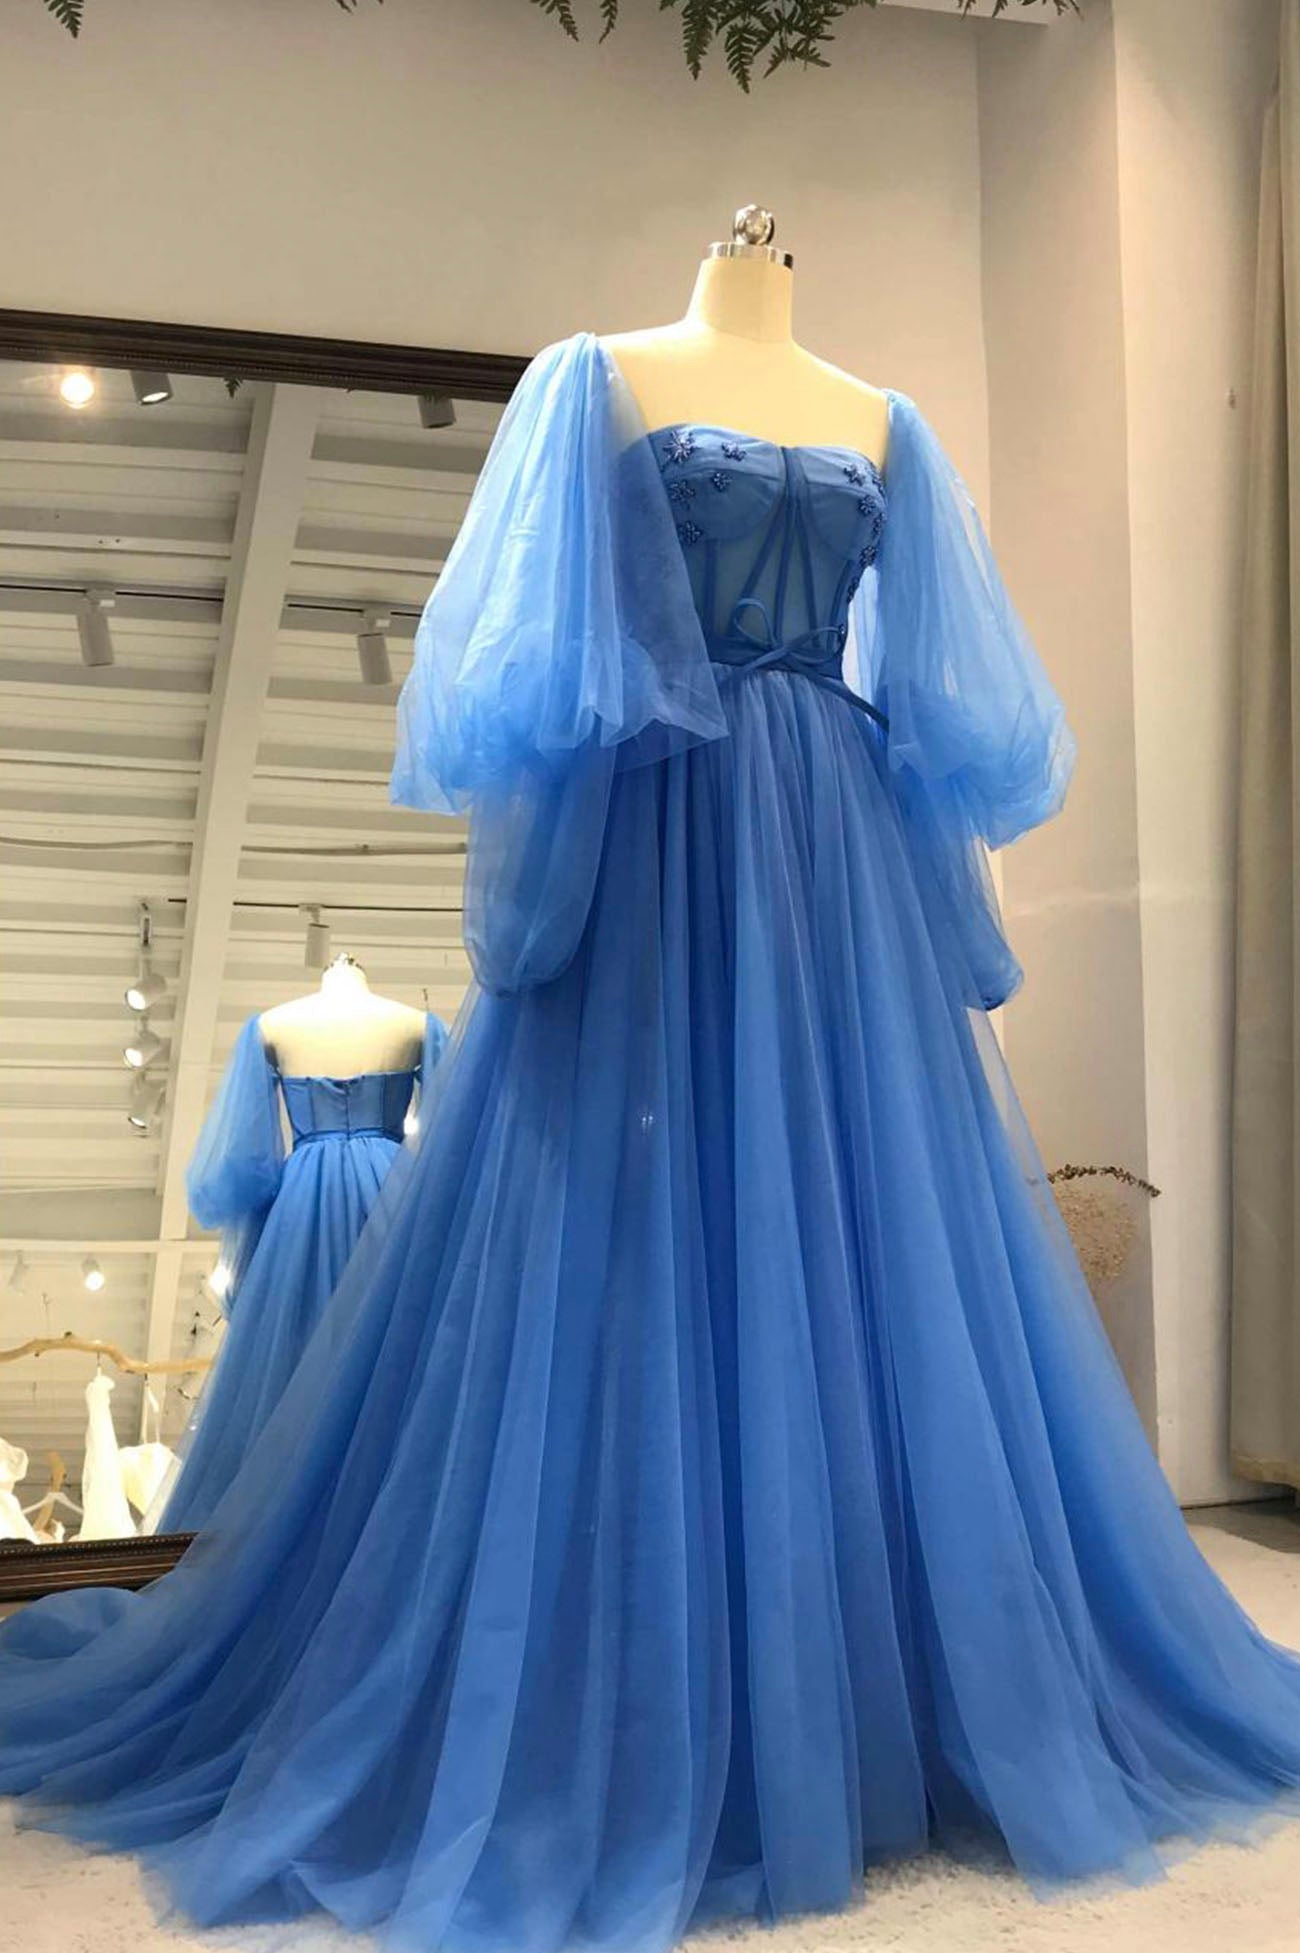 Formal Dress Boutiques Near Me, Blue Tulle Long Prom Dresses, A-Line Long Sleeve Evening Dresses